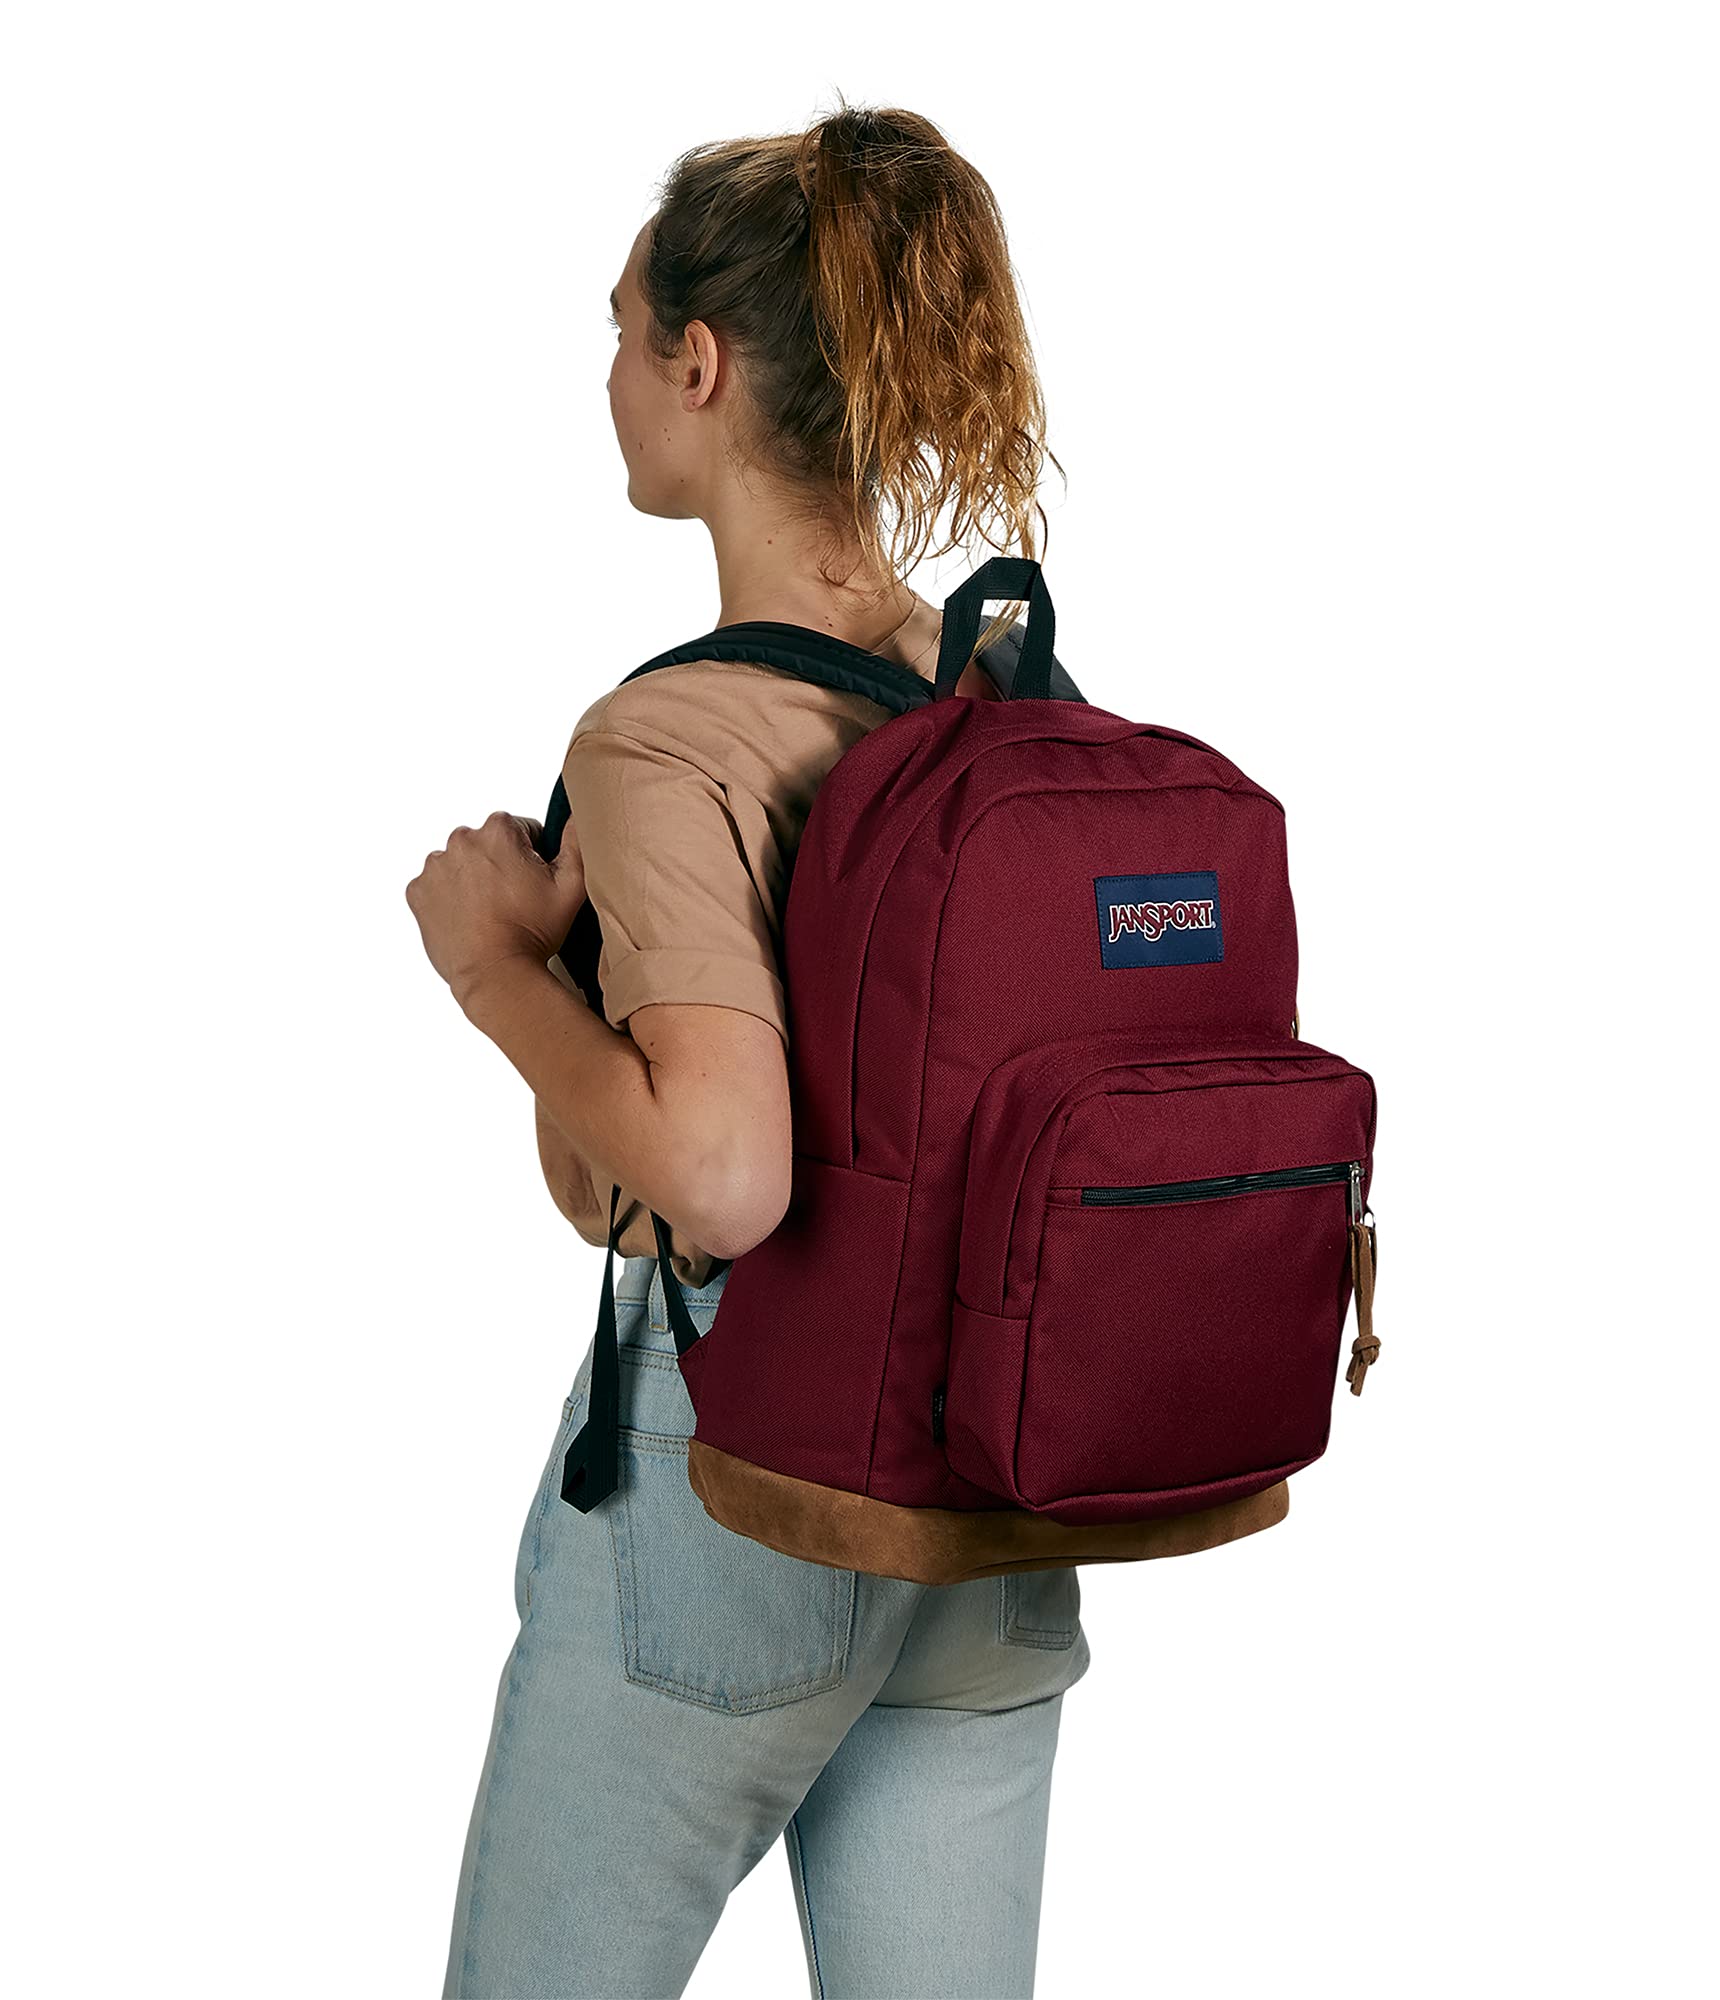 JanSport Right Pack Backpack - Travel, Work, or Laptop Bookbag with Leather Bottom, Russet Red